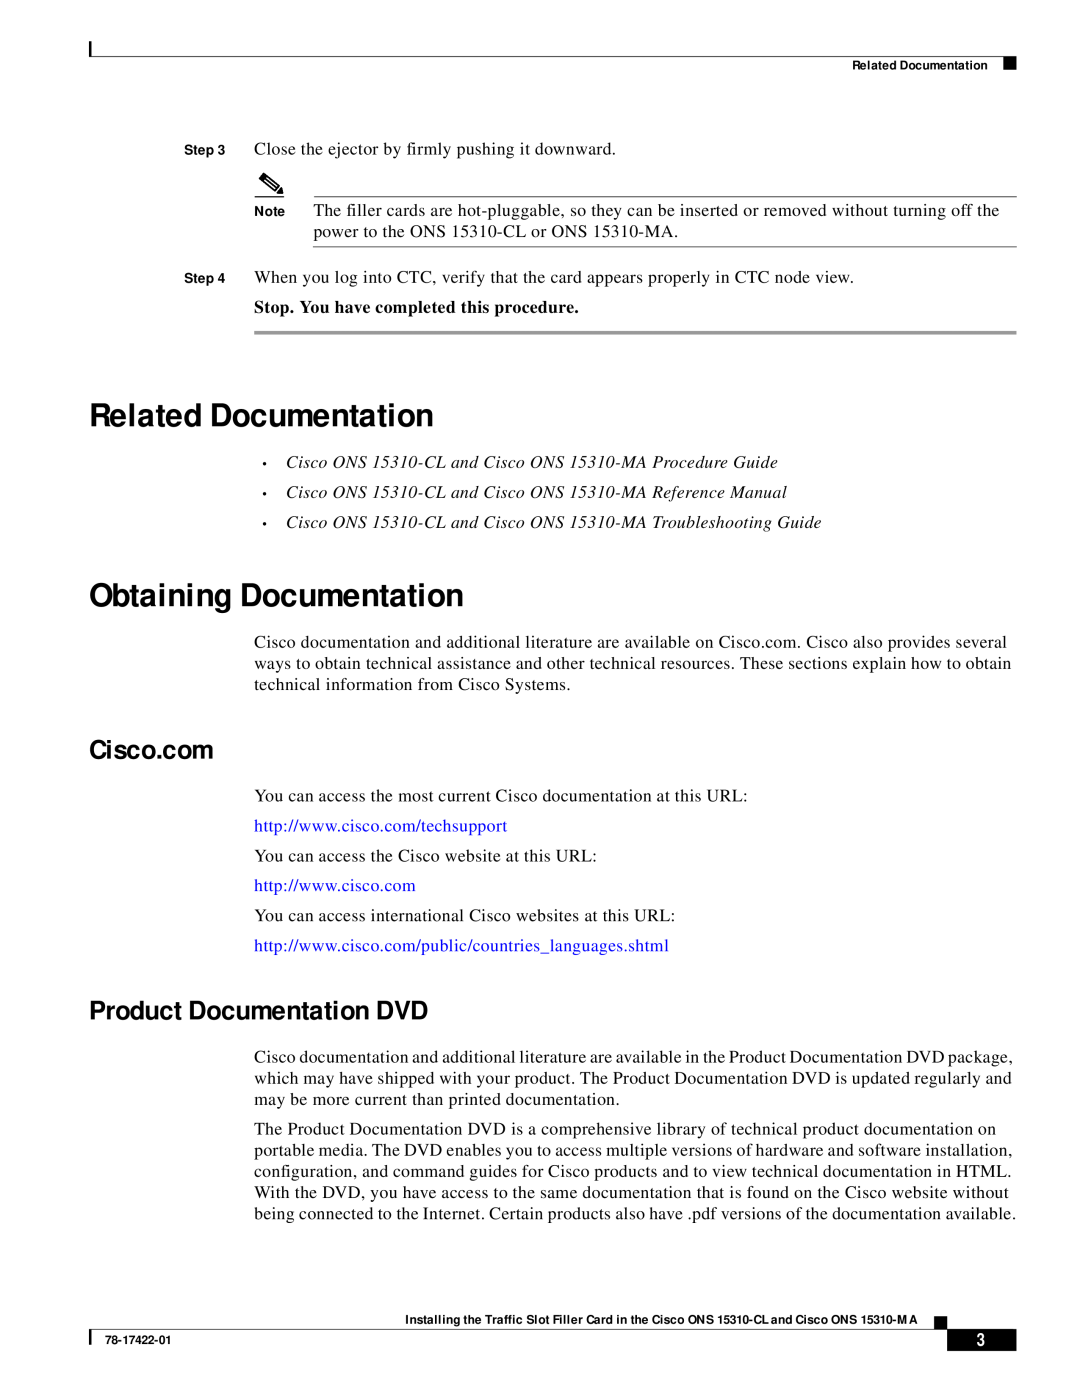 Cisco Systems 15310-CL, 15310-MA Related Documentation, Obtaining Documentation, Cisco.com, Product Documentation DVD 